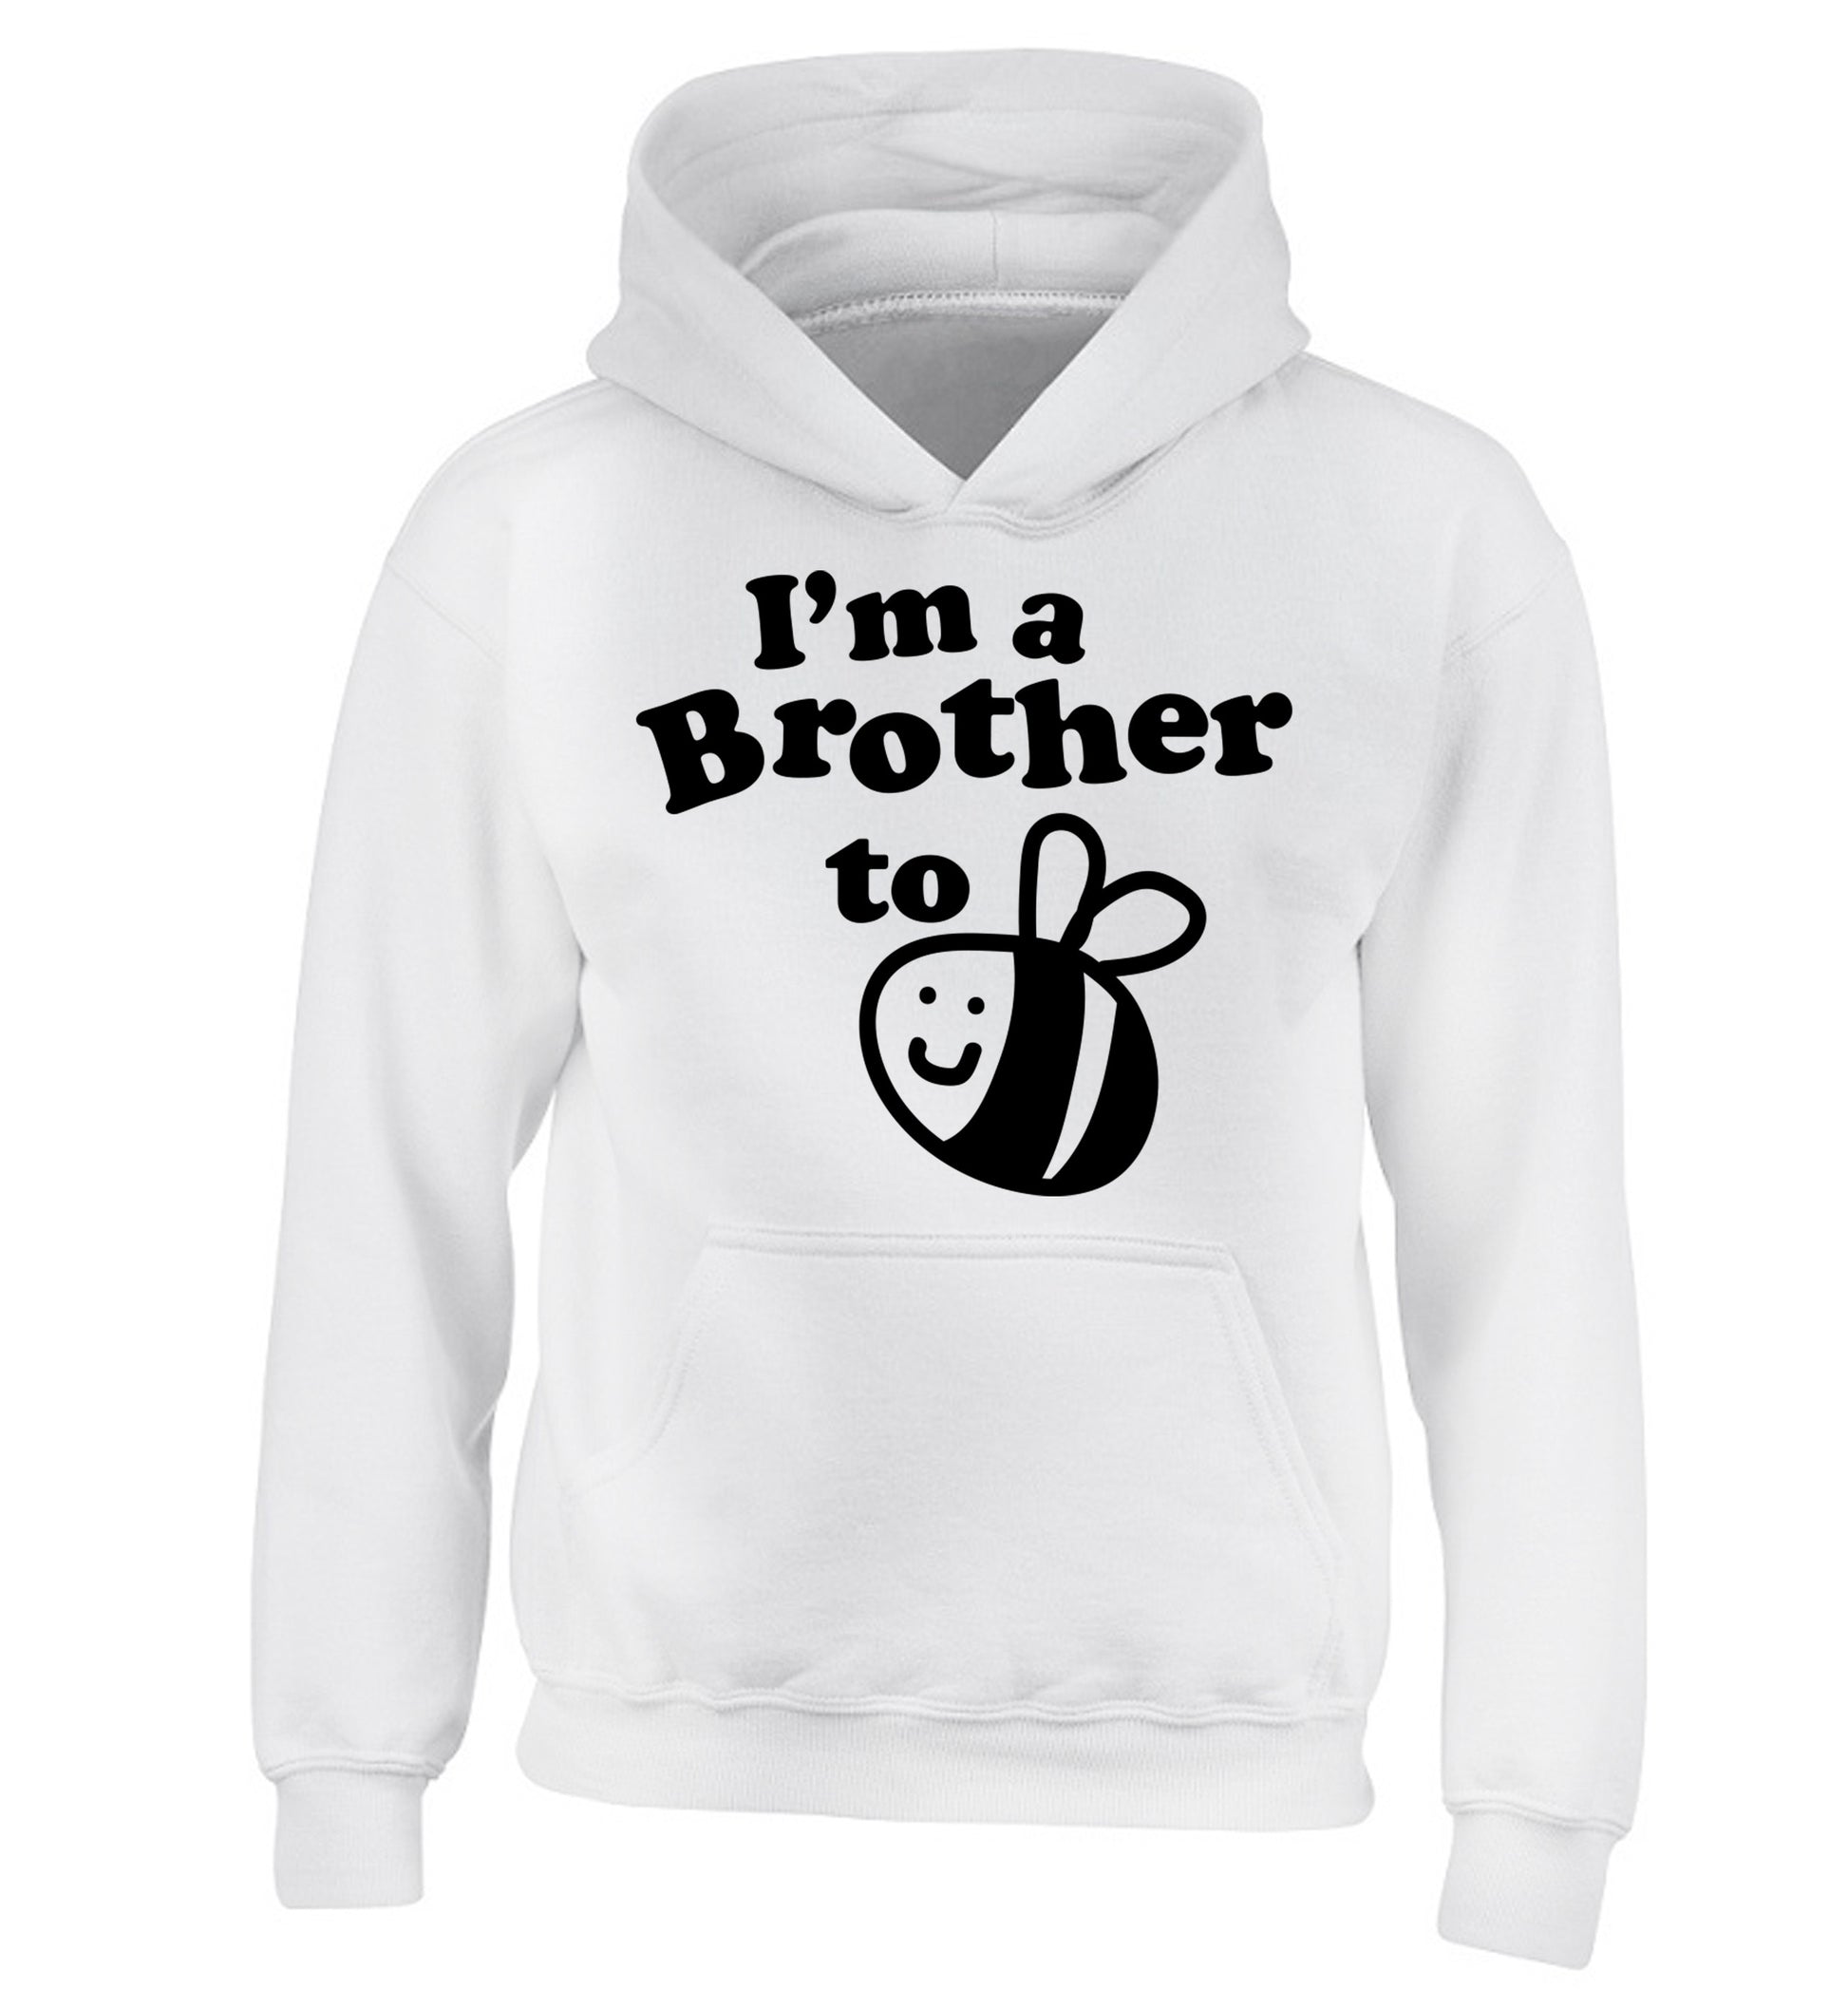 I'm a brother to be children's white hoodie 12-14 Years